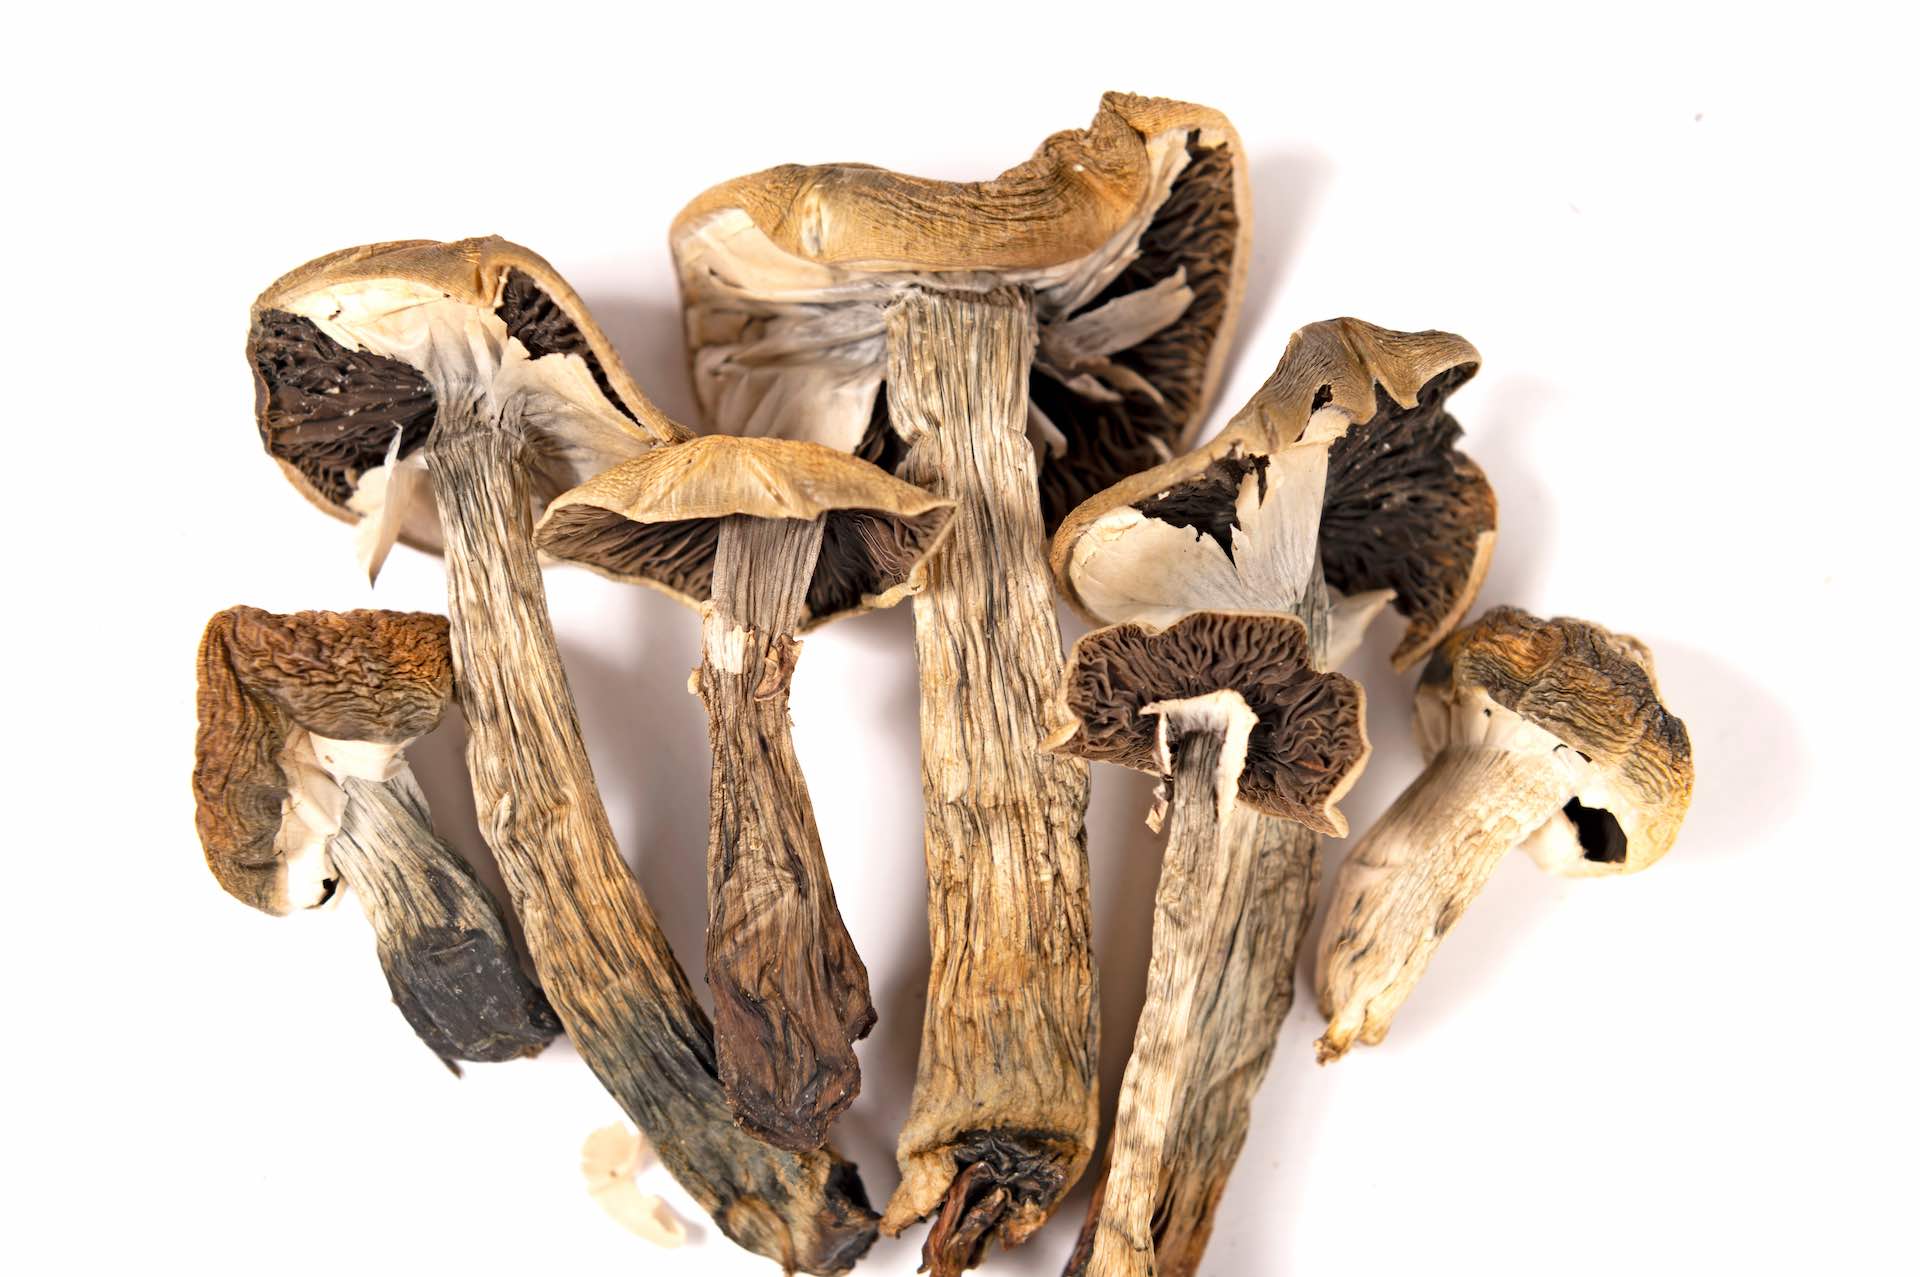 https://recipes.net/wp-content/uploads/2024/01/how-to-dehydrate-shrooms-1704658696.jpg